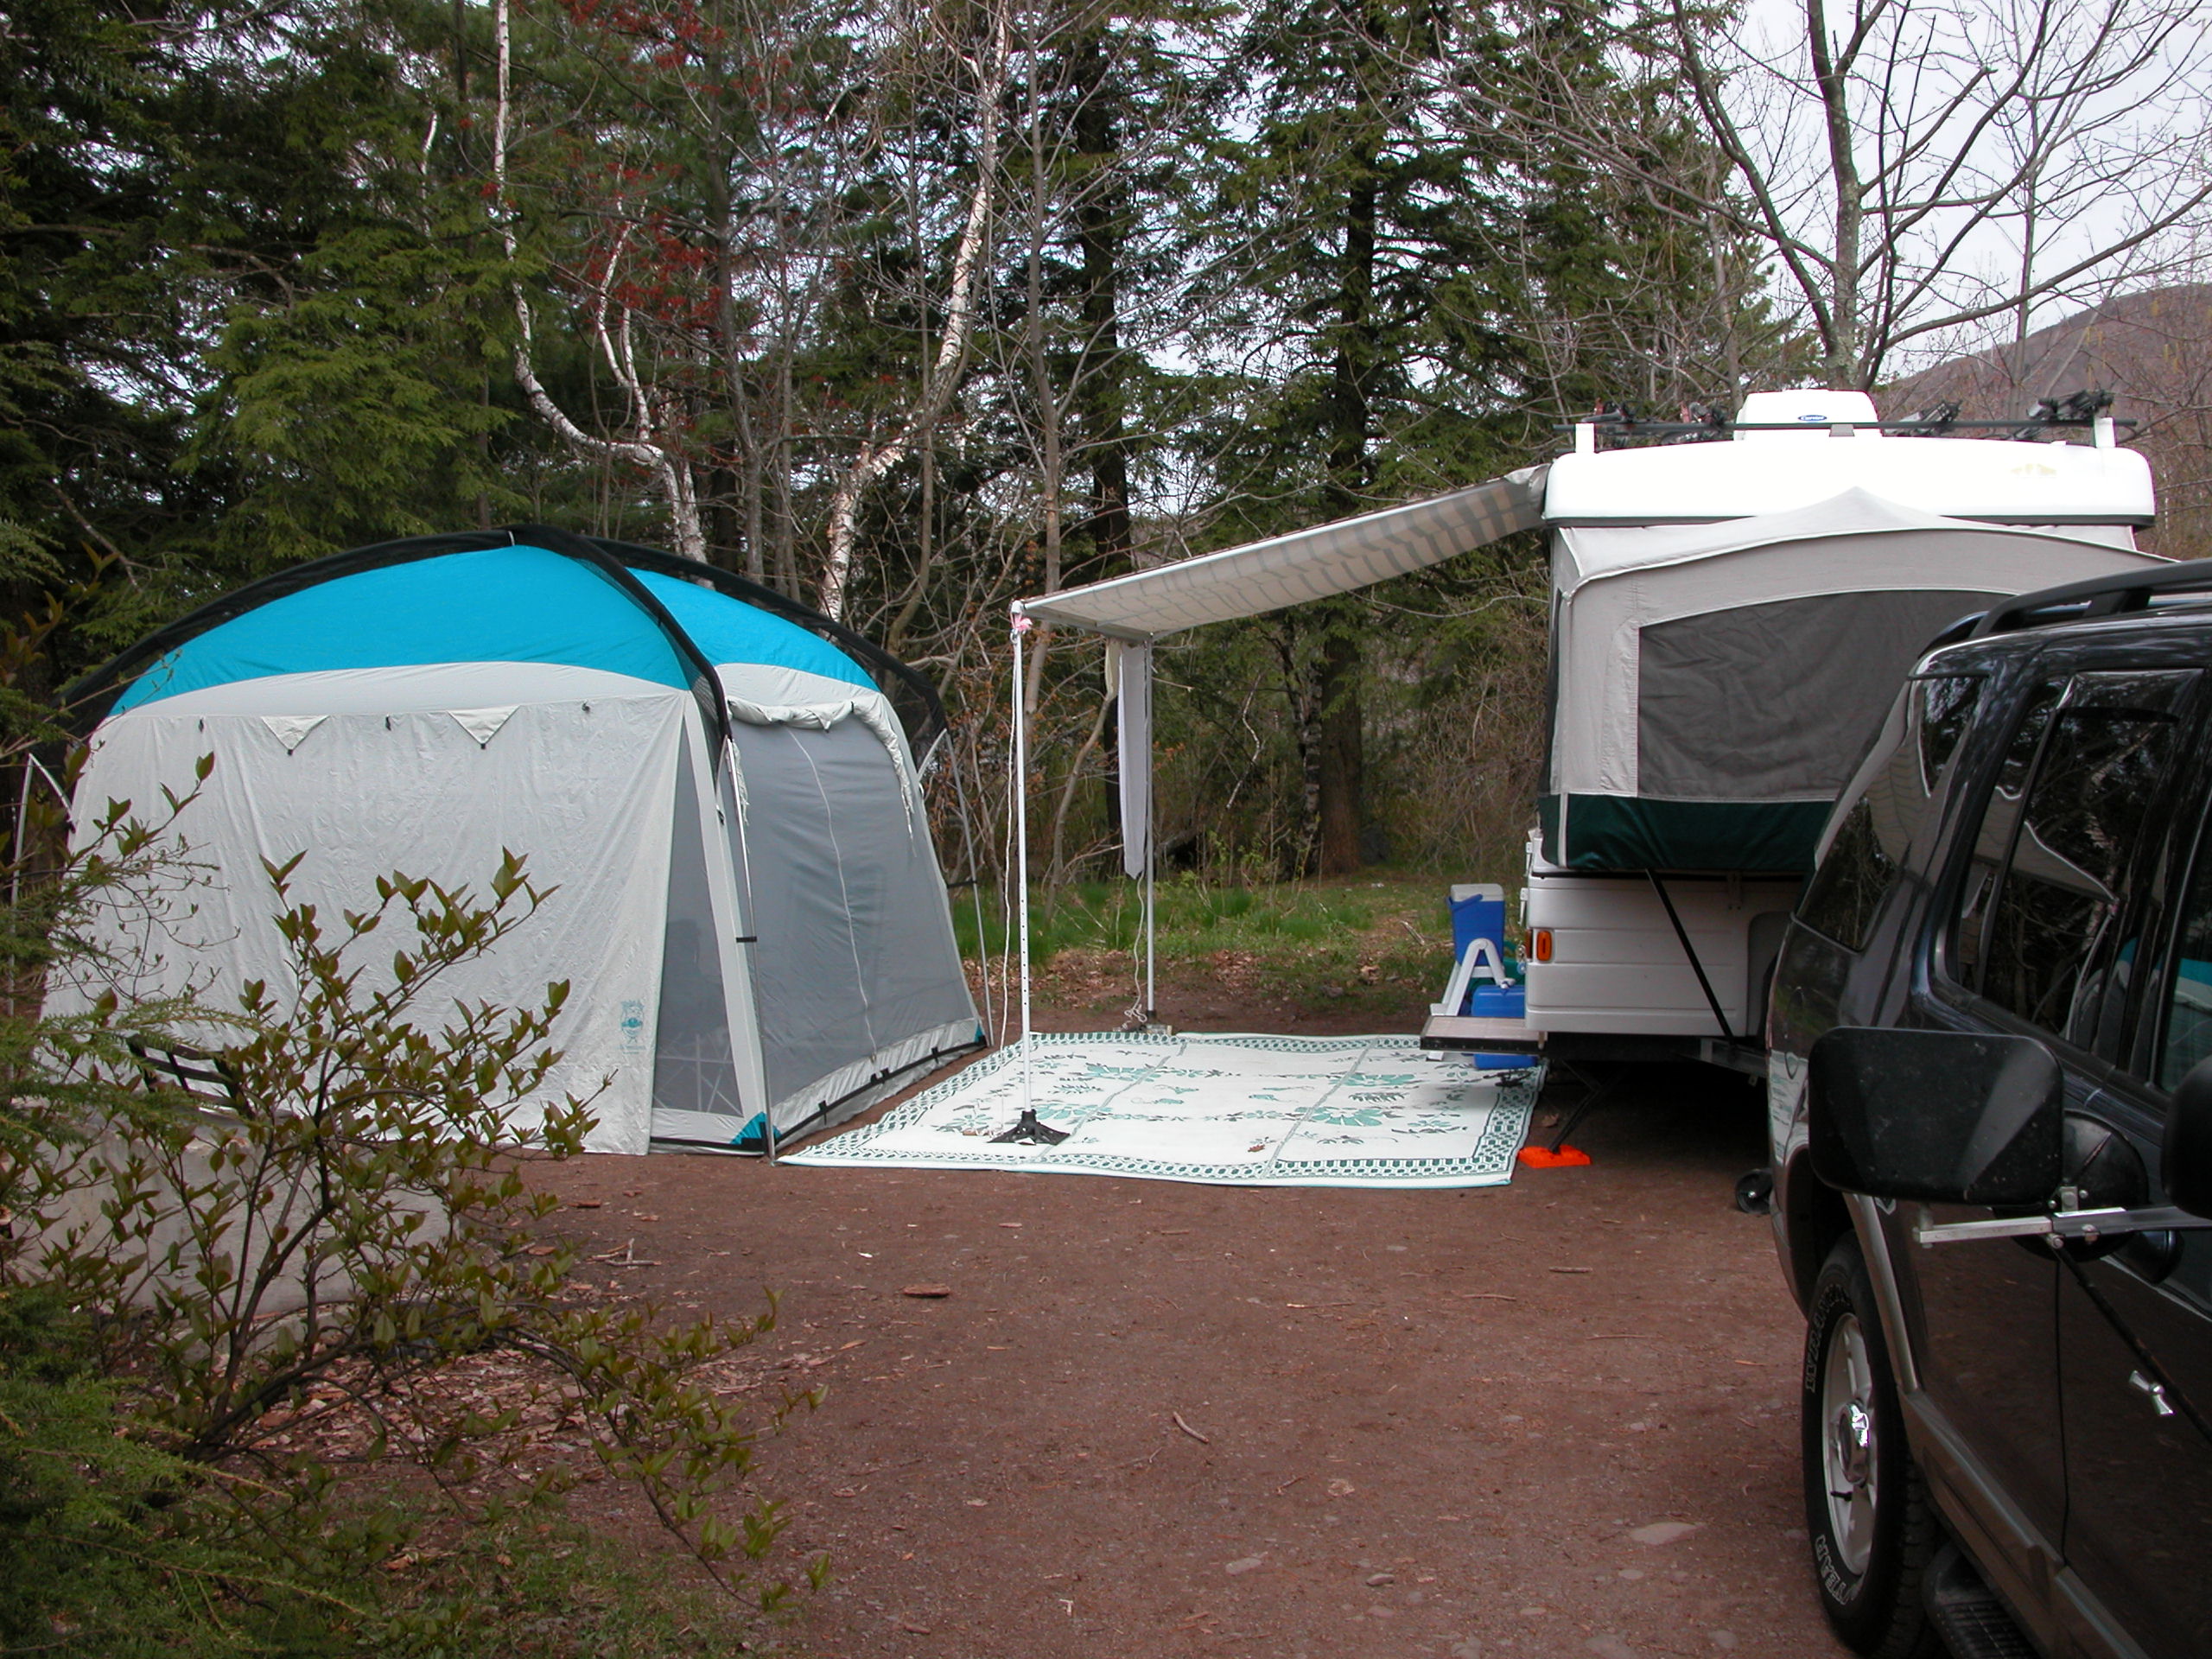 tlhdoc's campsite at North-South Lake, May 2003